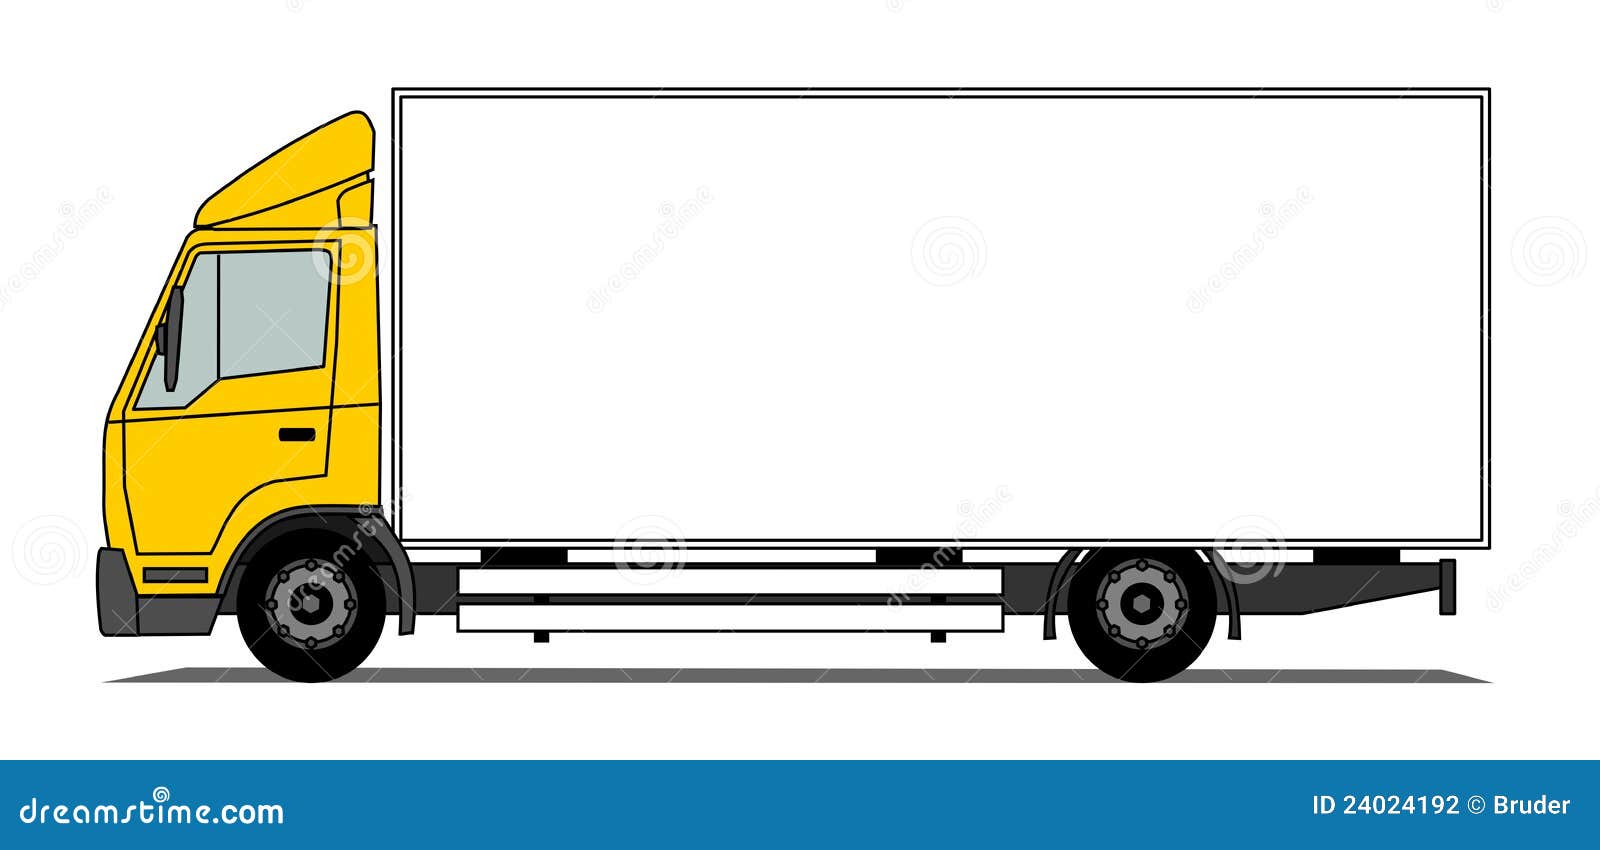 Middle box truck stock vector. Illustration of isolate